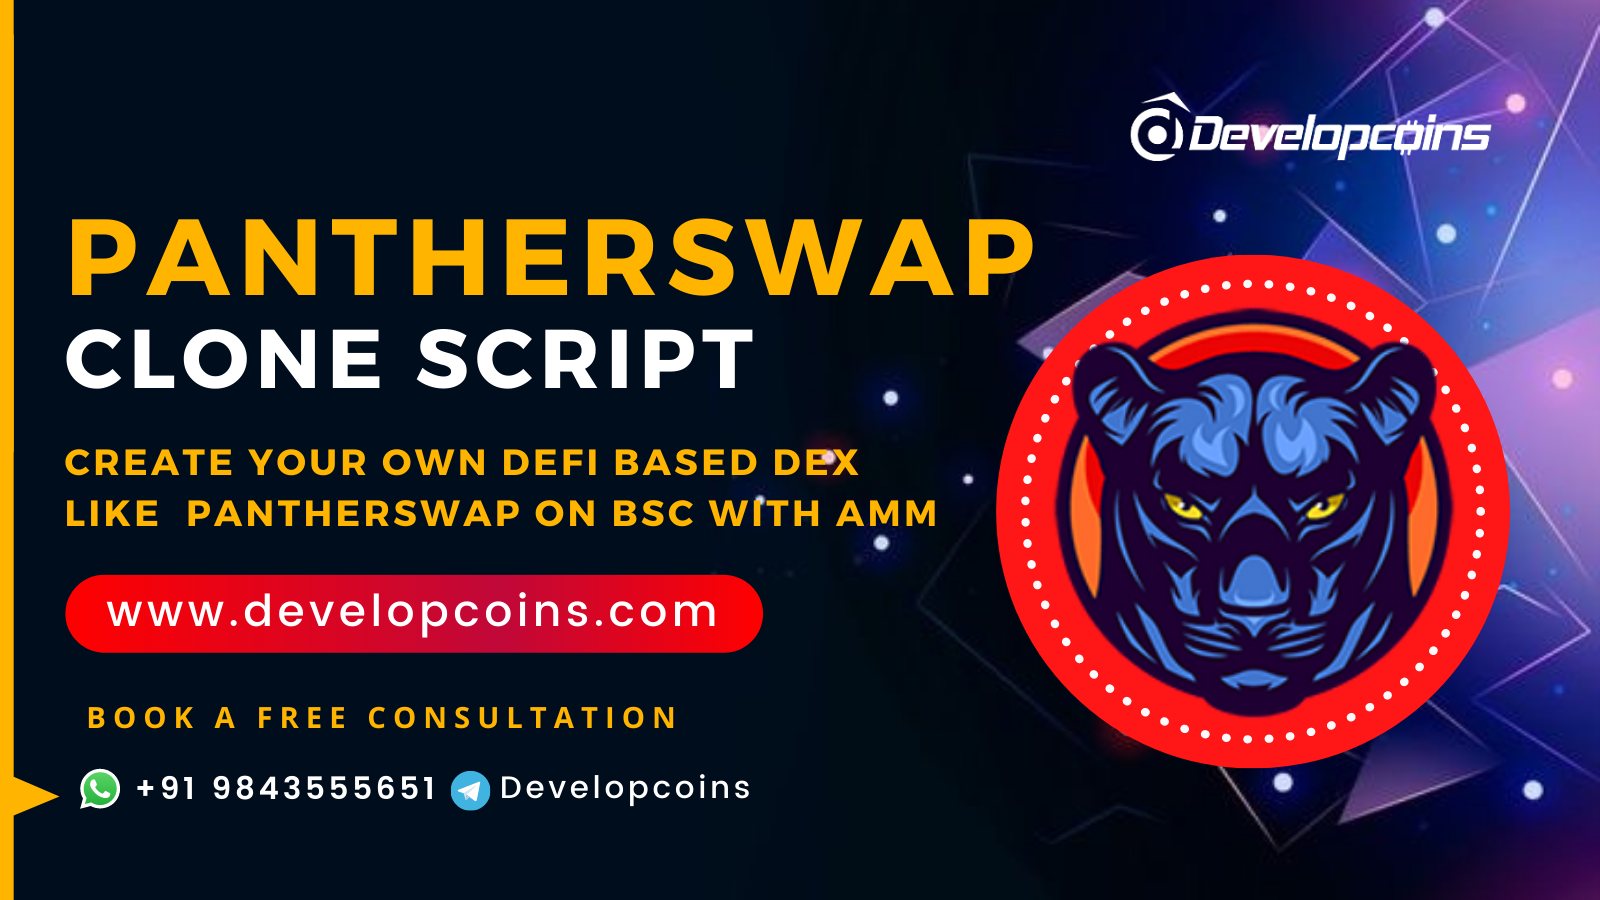 PantherSwap Clone Script To Create Your Own DeFi based DEX Like PantherSwap